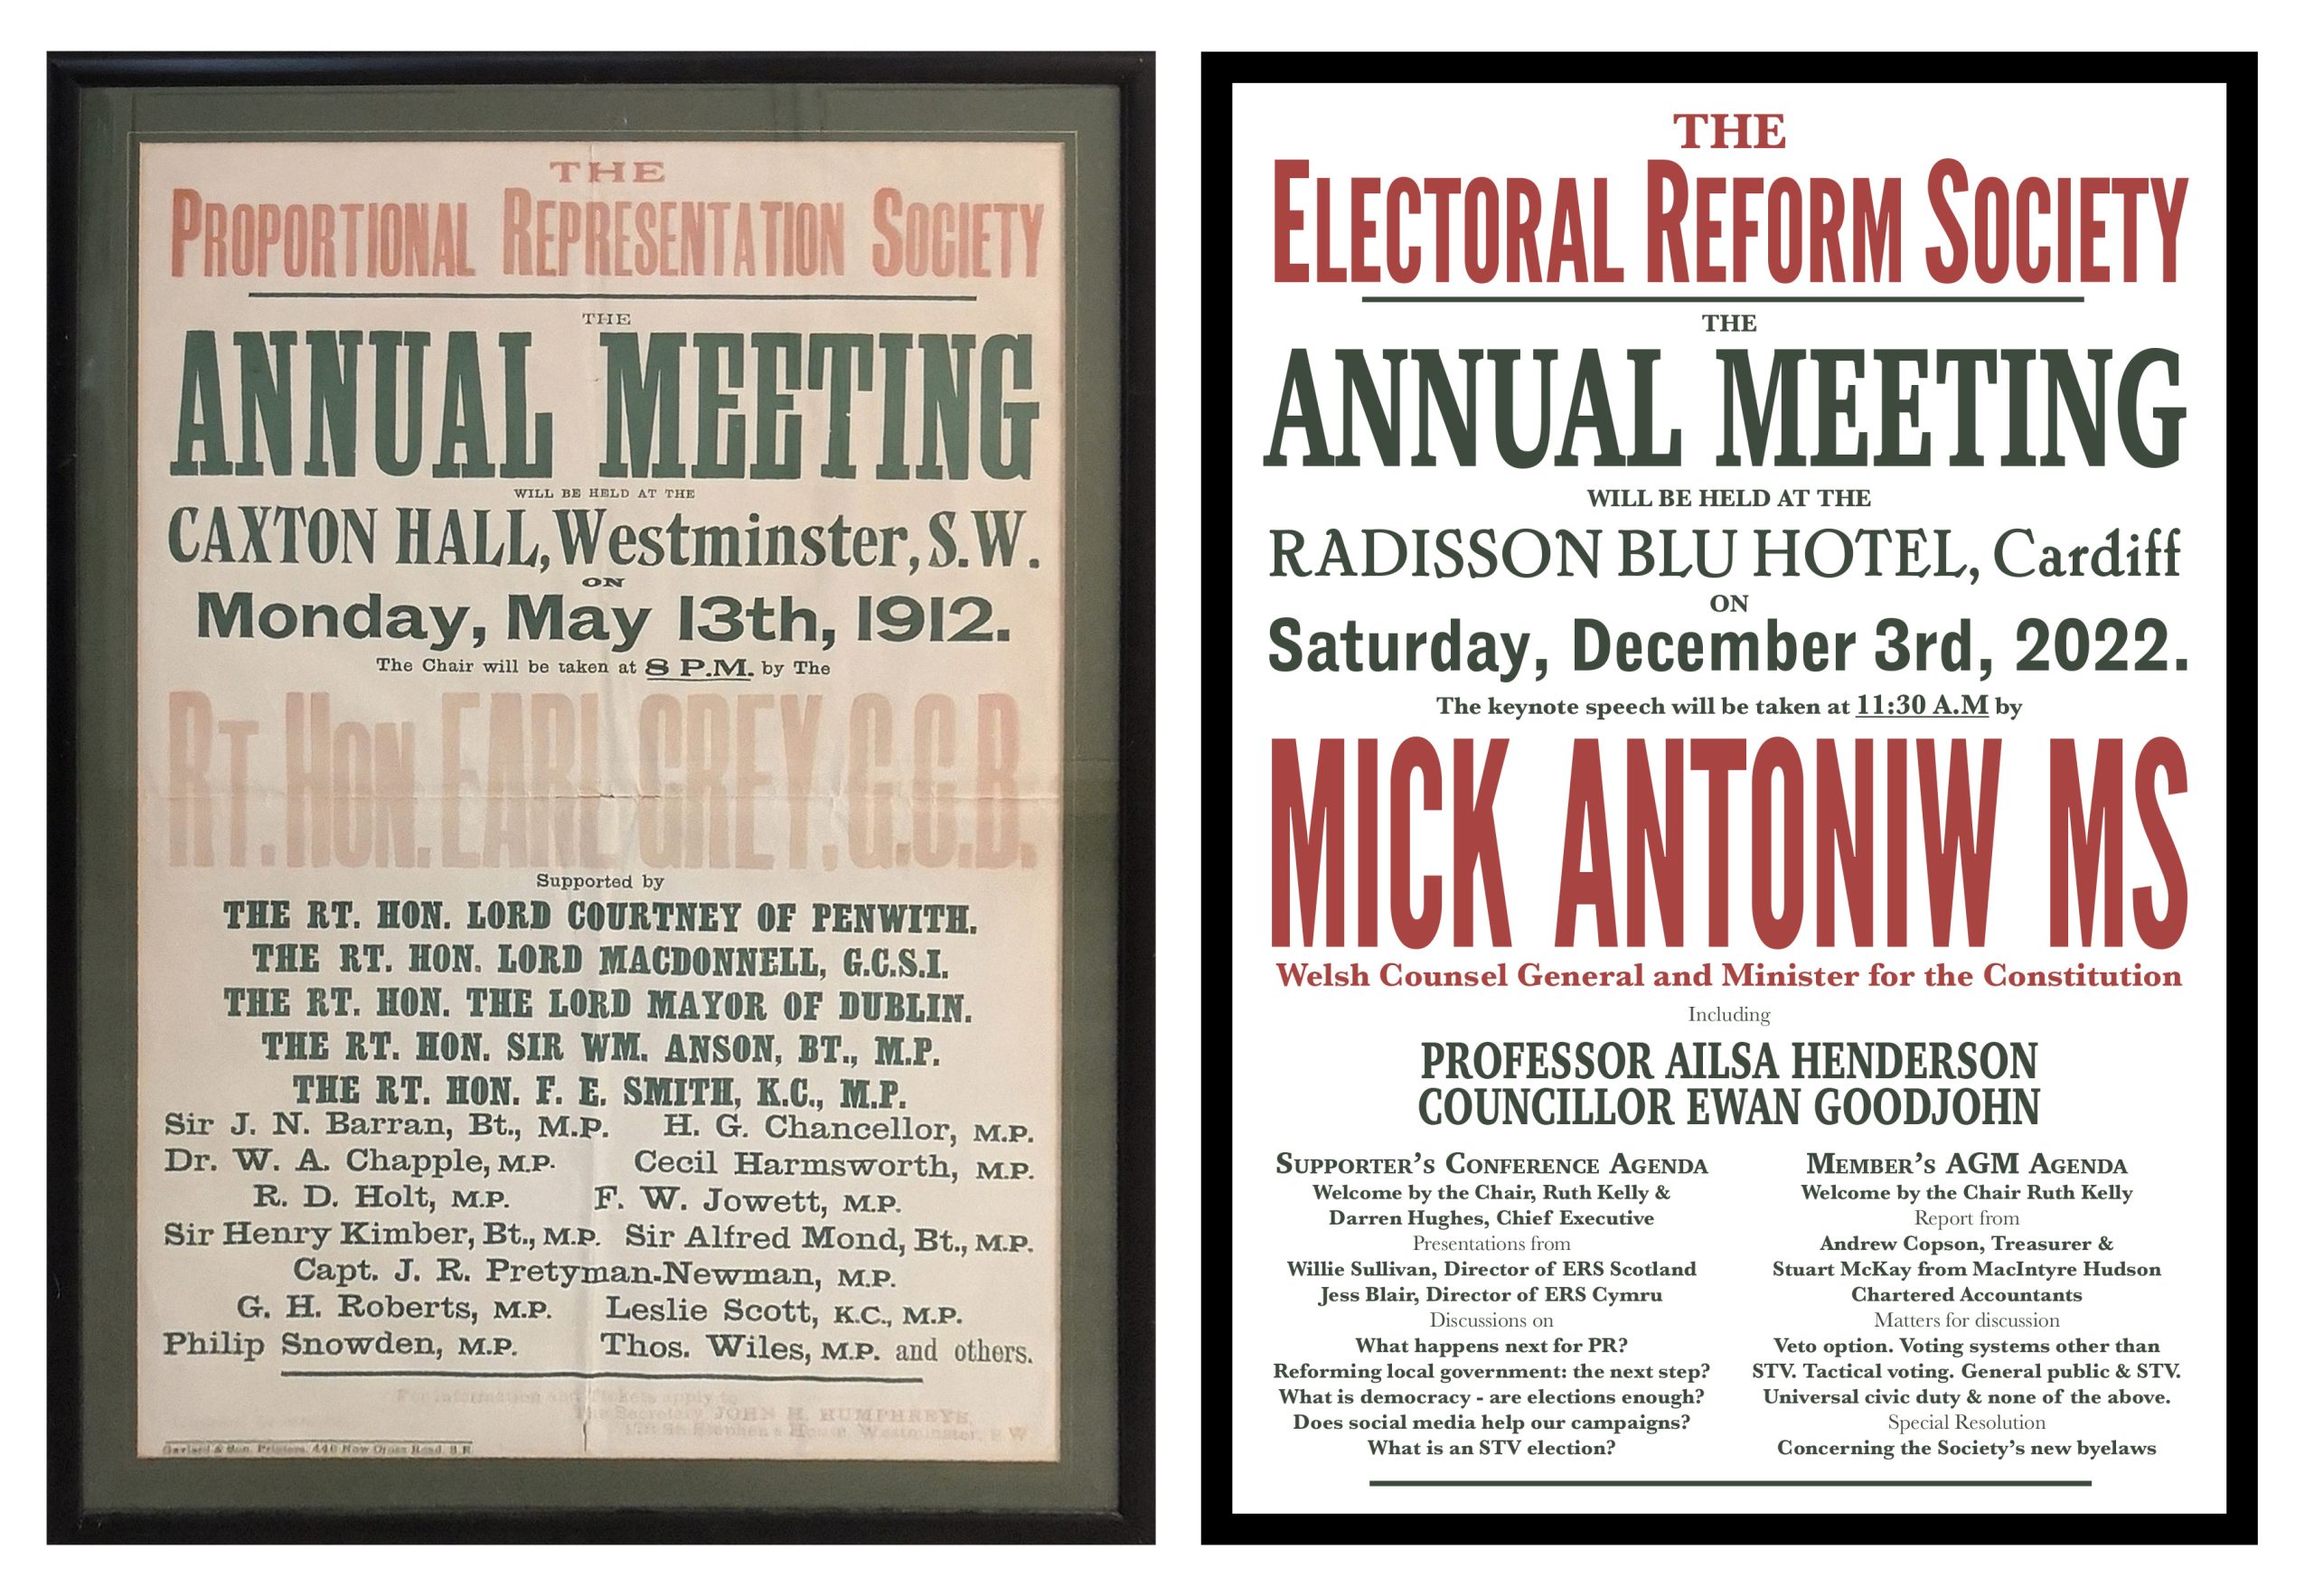 1912 and 2022 AGM poster